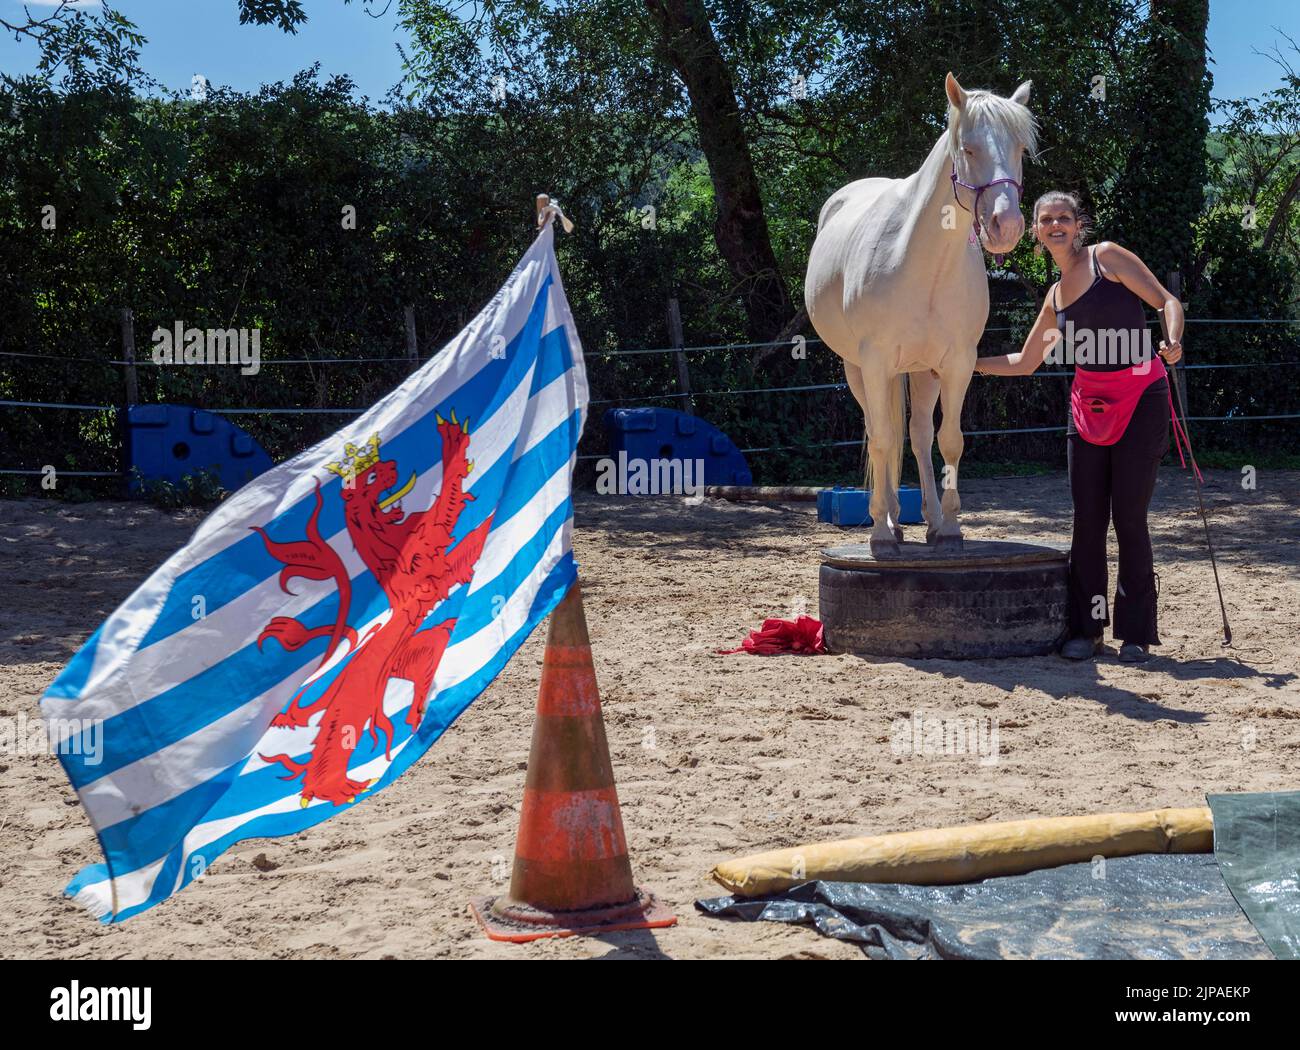 Demonstration of Horse Skills at the Mounted Archery Contest in Limpach, Luxembourg on 2nd July 2022 Stock Photo